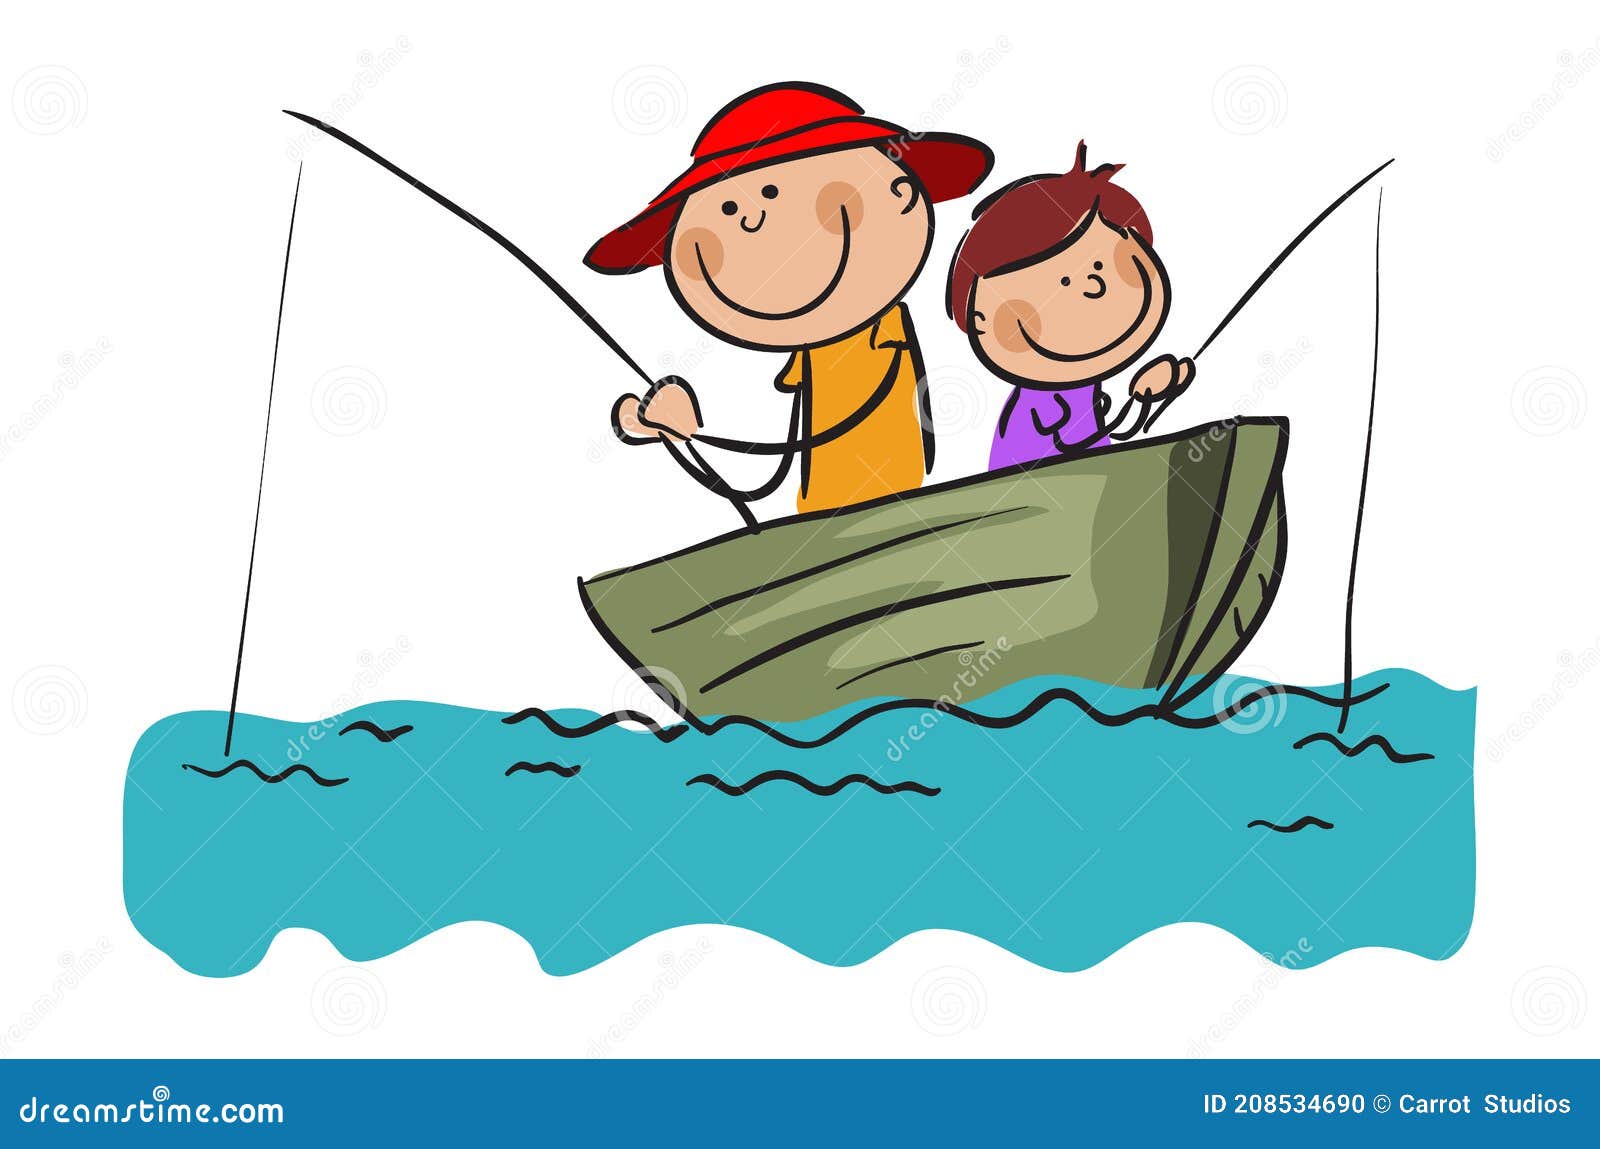 14 Two Fishing Rods Boat Stock Illustrations, Vectors & Clipart - Dreamstime